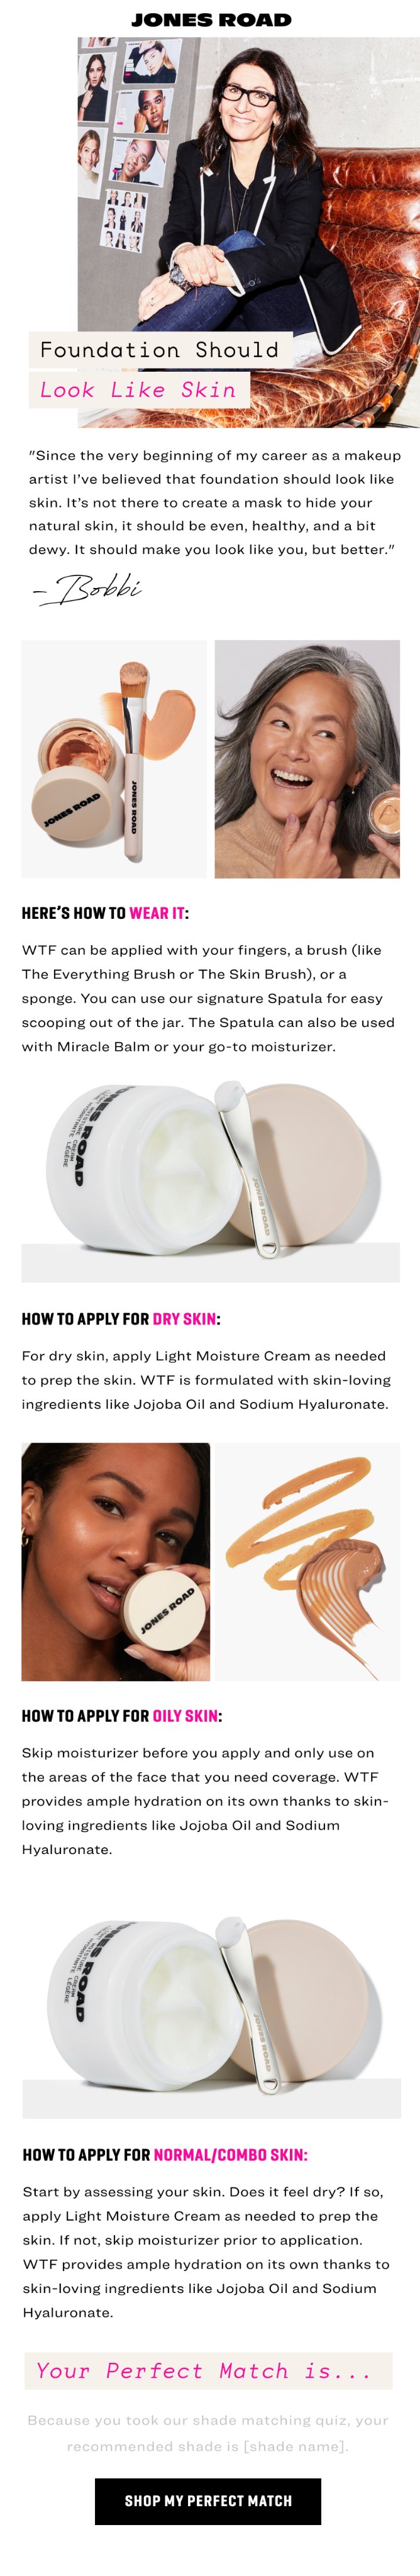 Jones Road Beauty's emails educates people on how to best use their foundation according to different skin types.